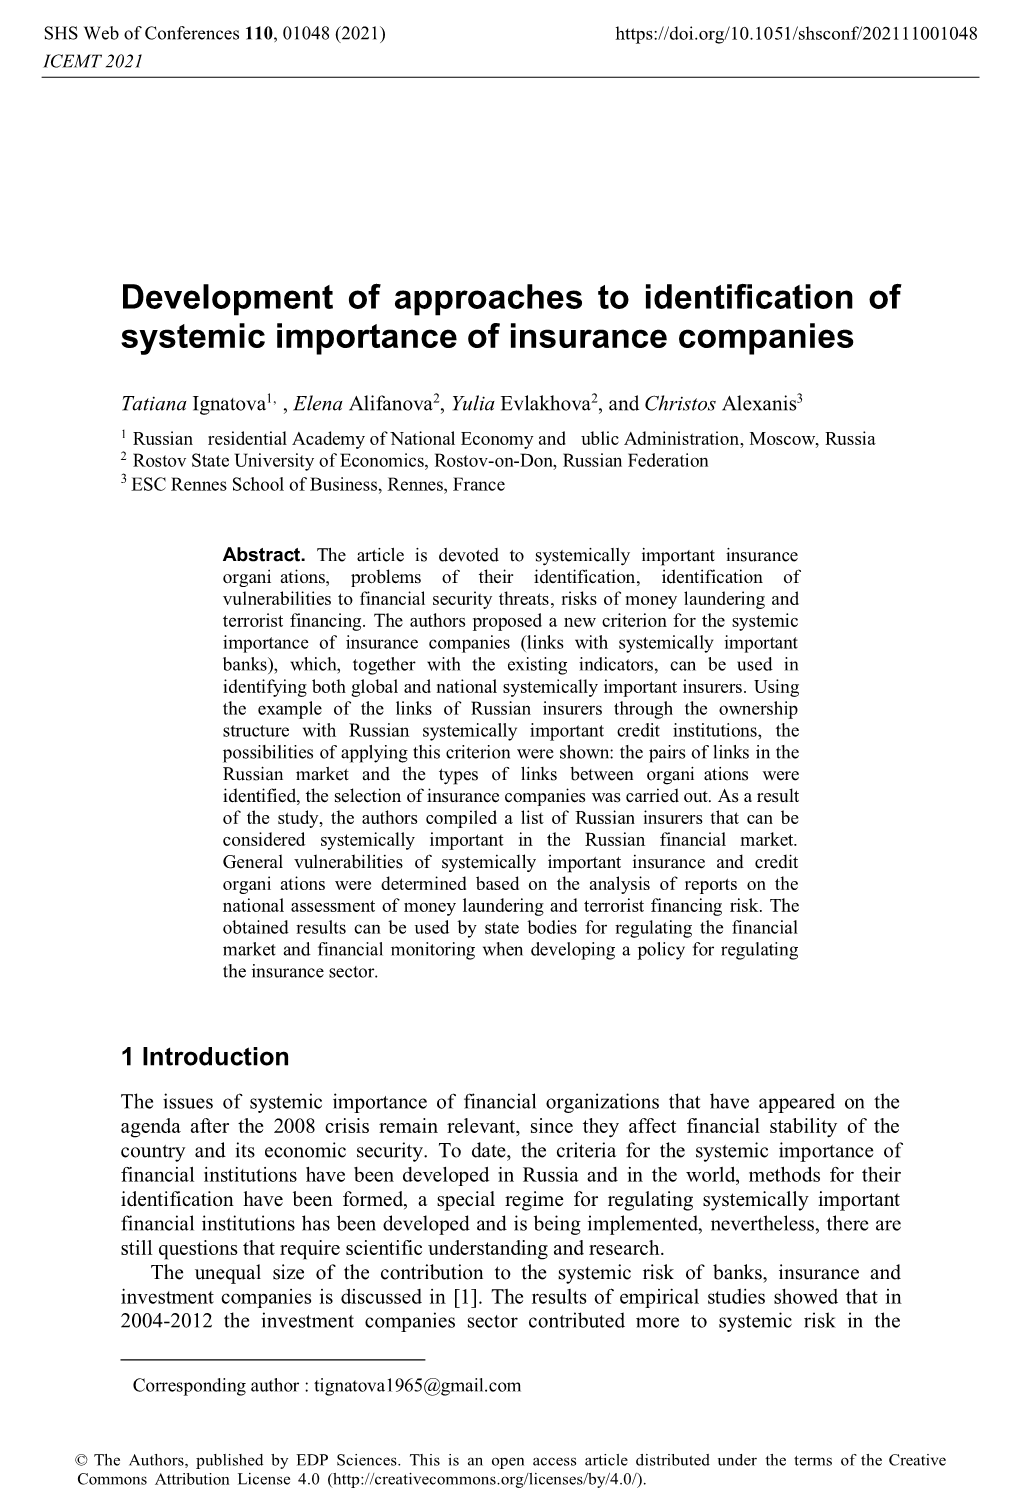 Development of Approaches to Identification of Systemic Importance of Insurance Companies